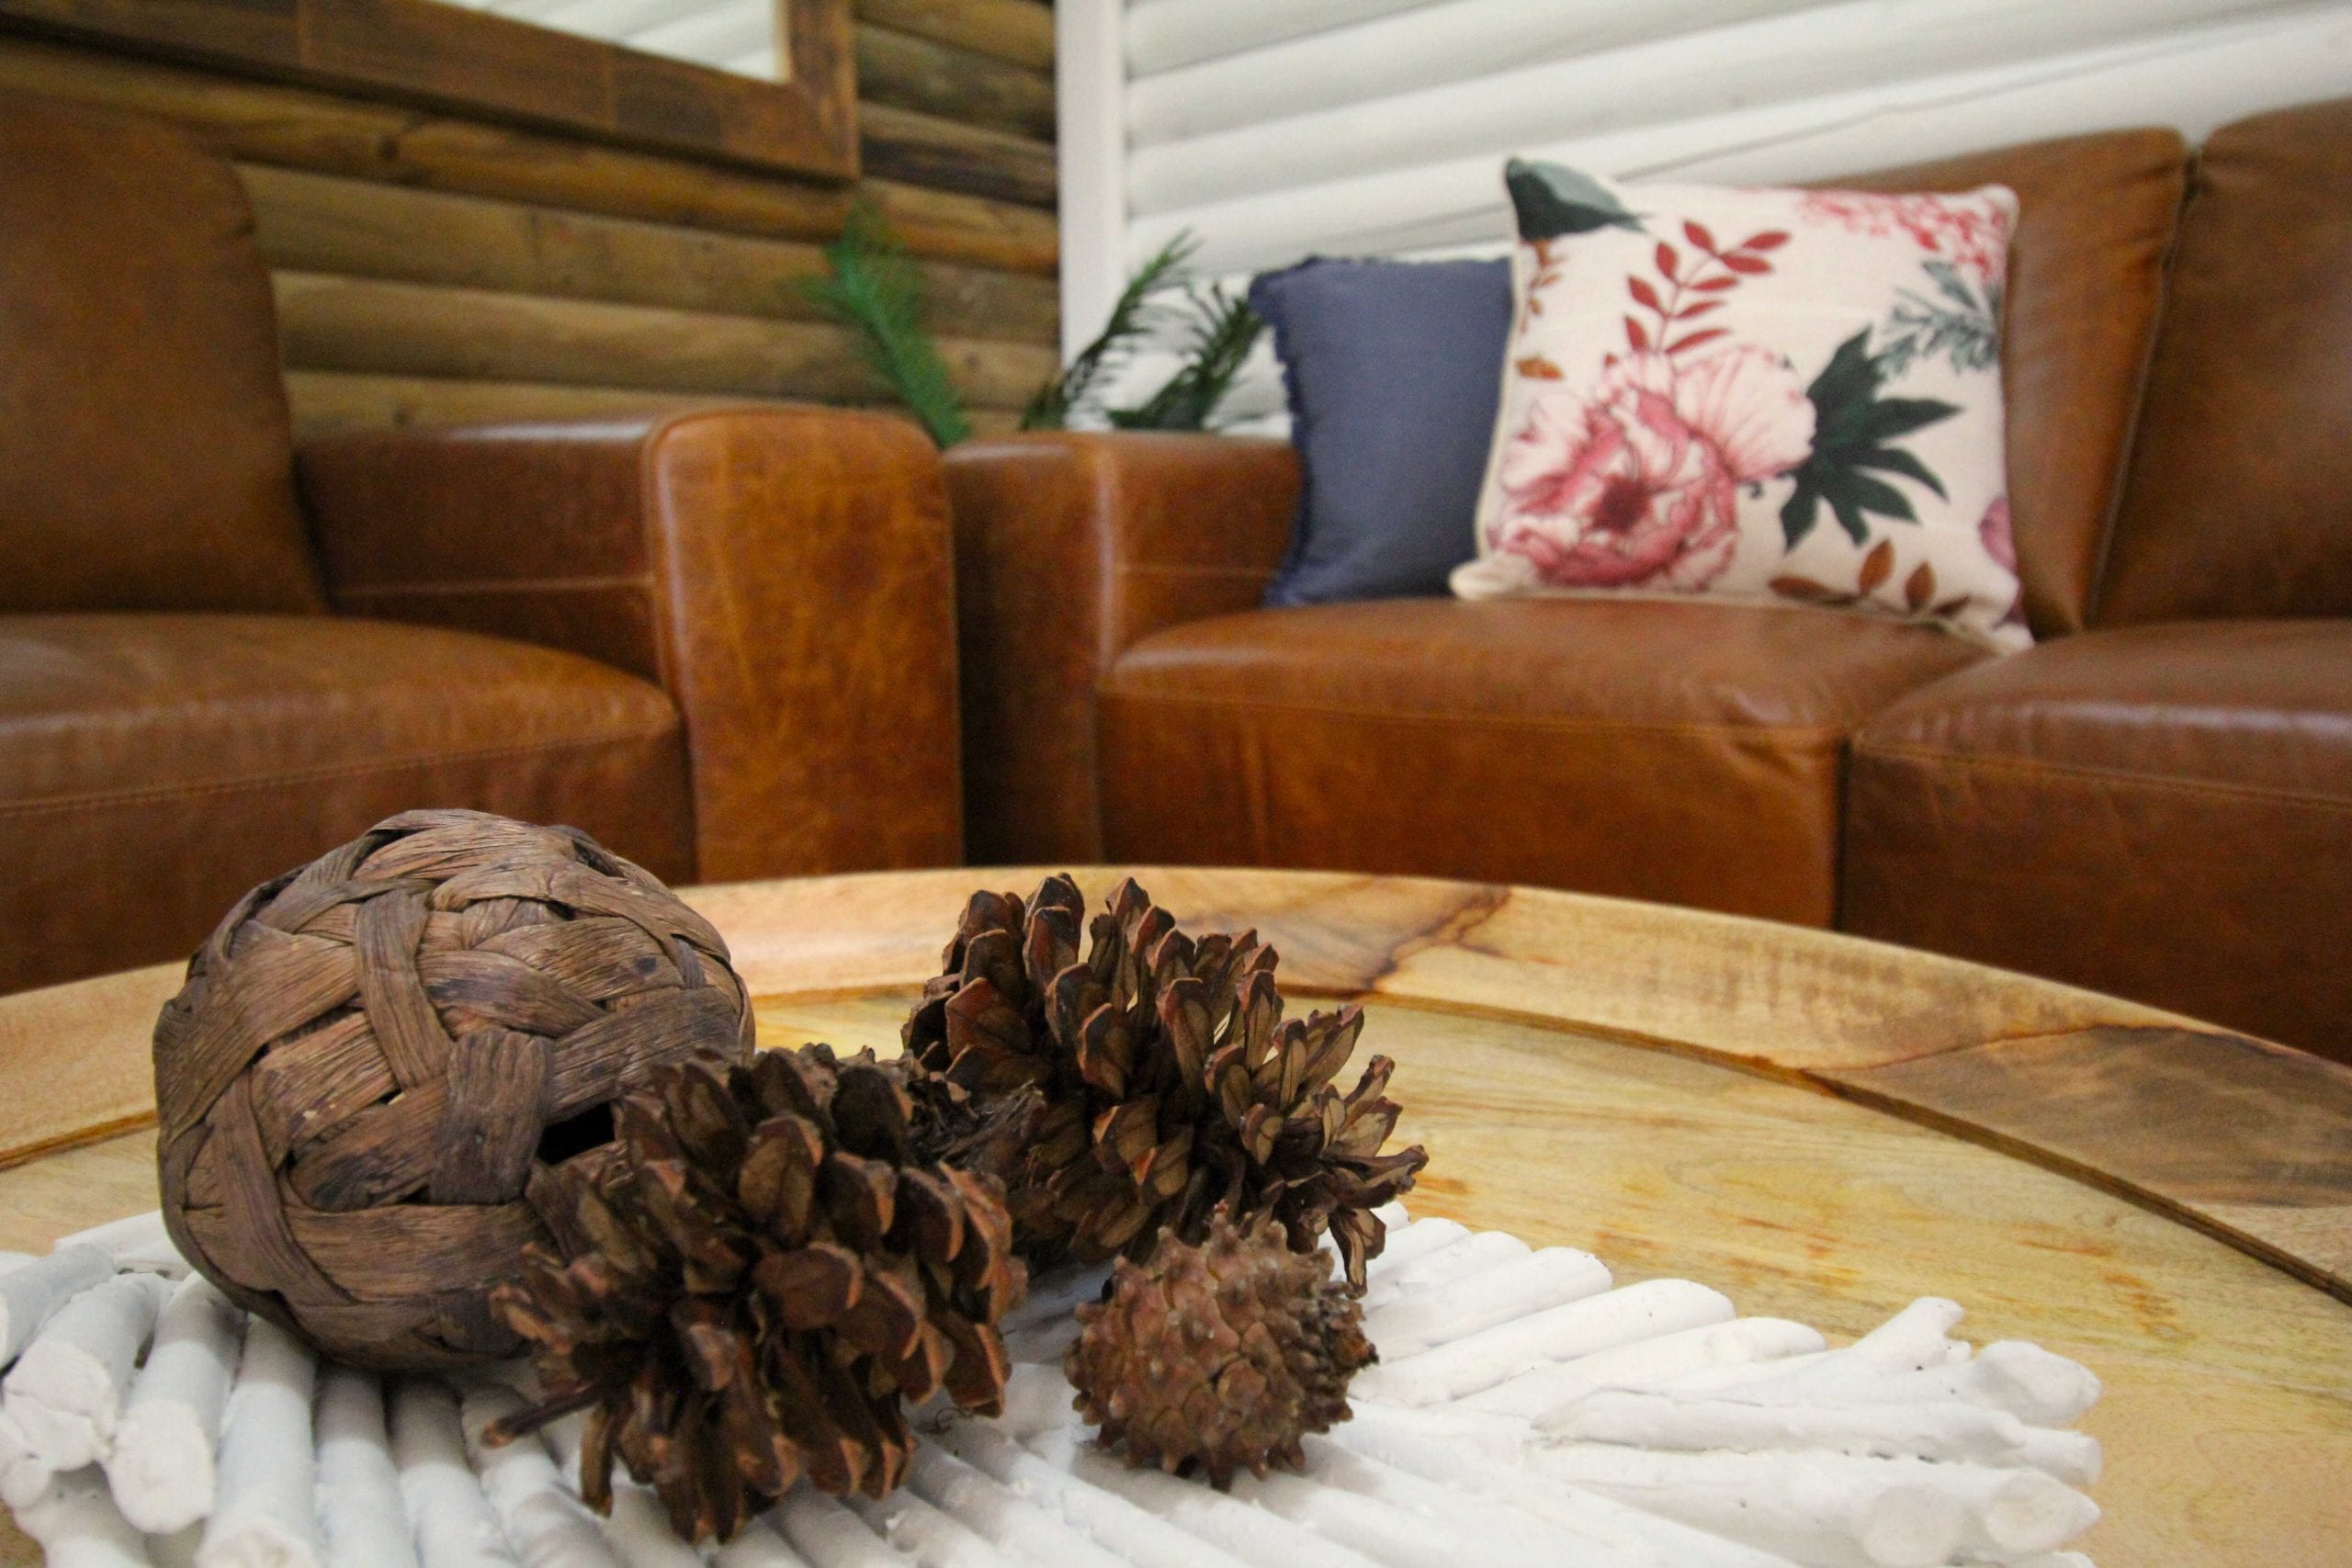 Decorative pinecones on a coffee table with leather couches in the background